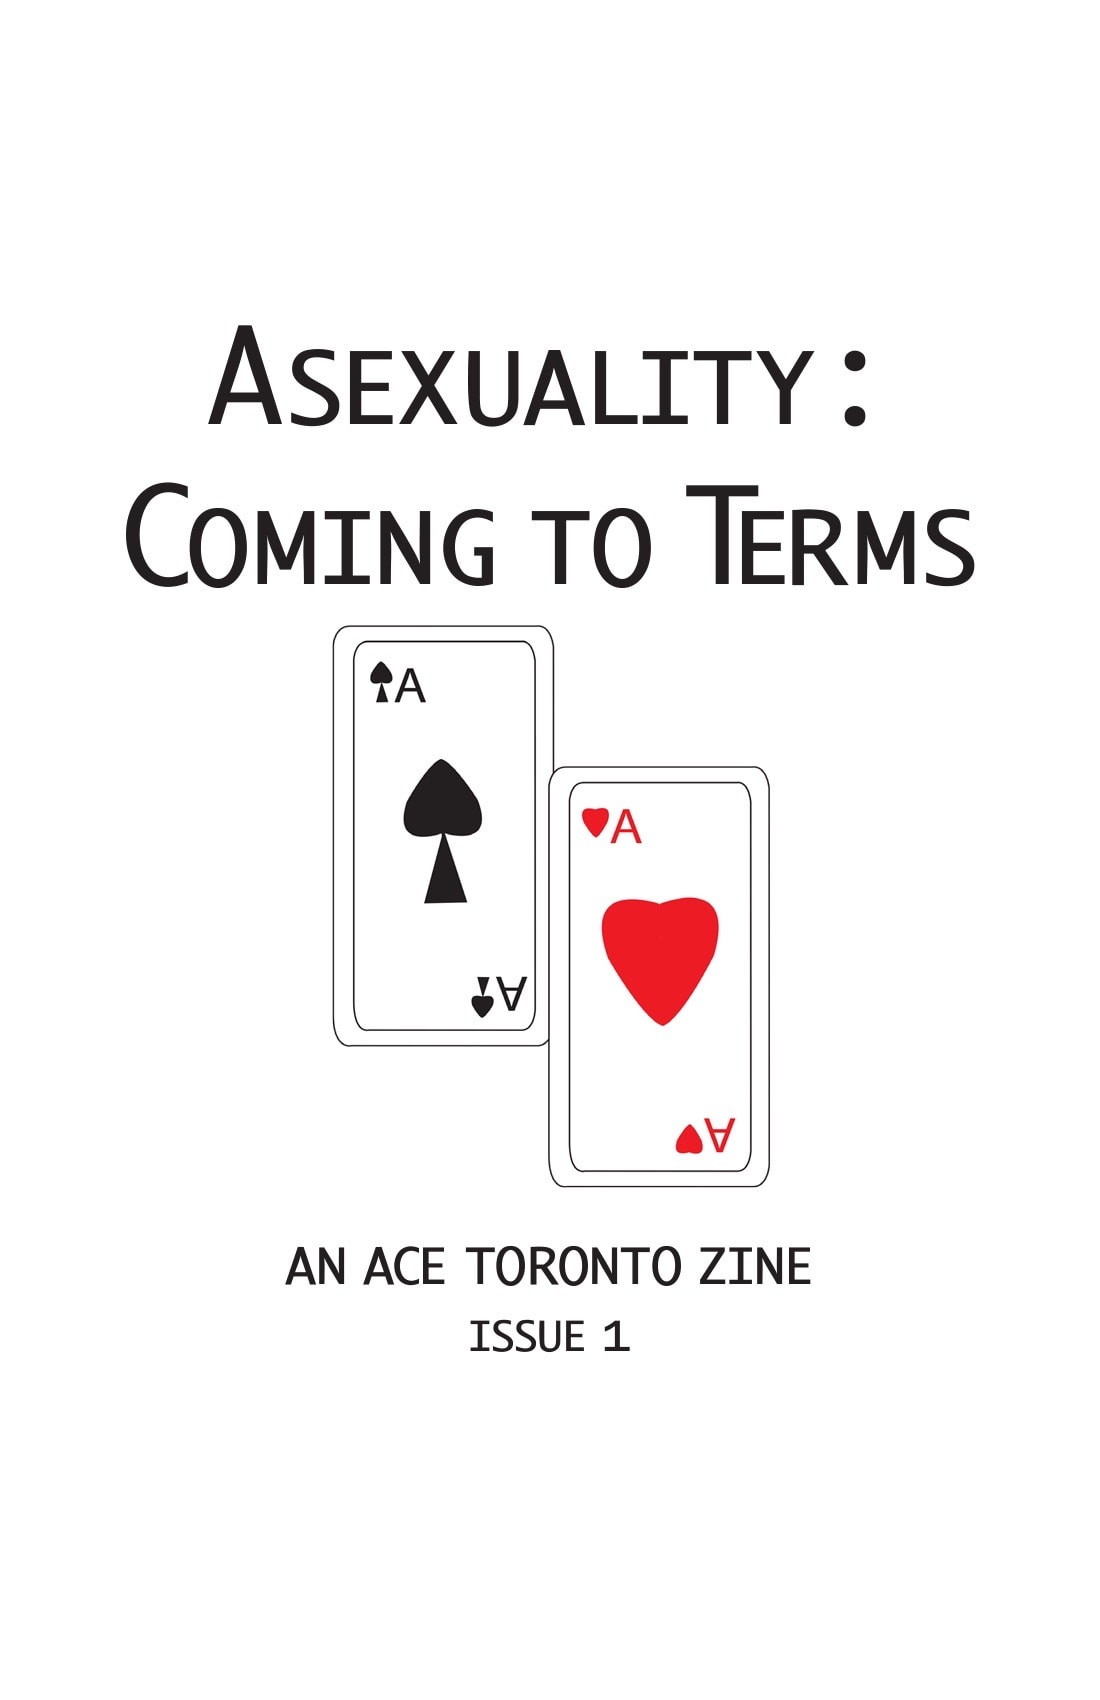 Cover of zine with an ace of spades and ace of hearts, titled “Asexuality: Coming to Terms”